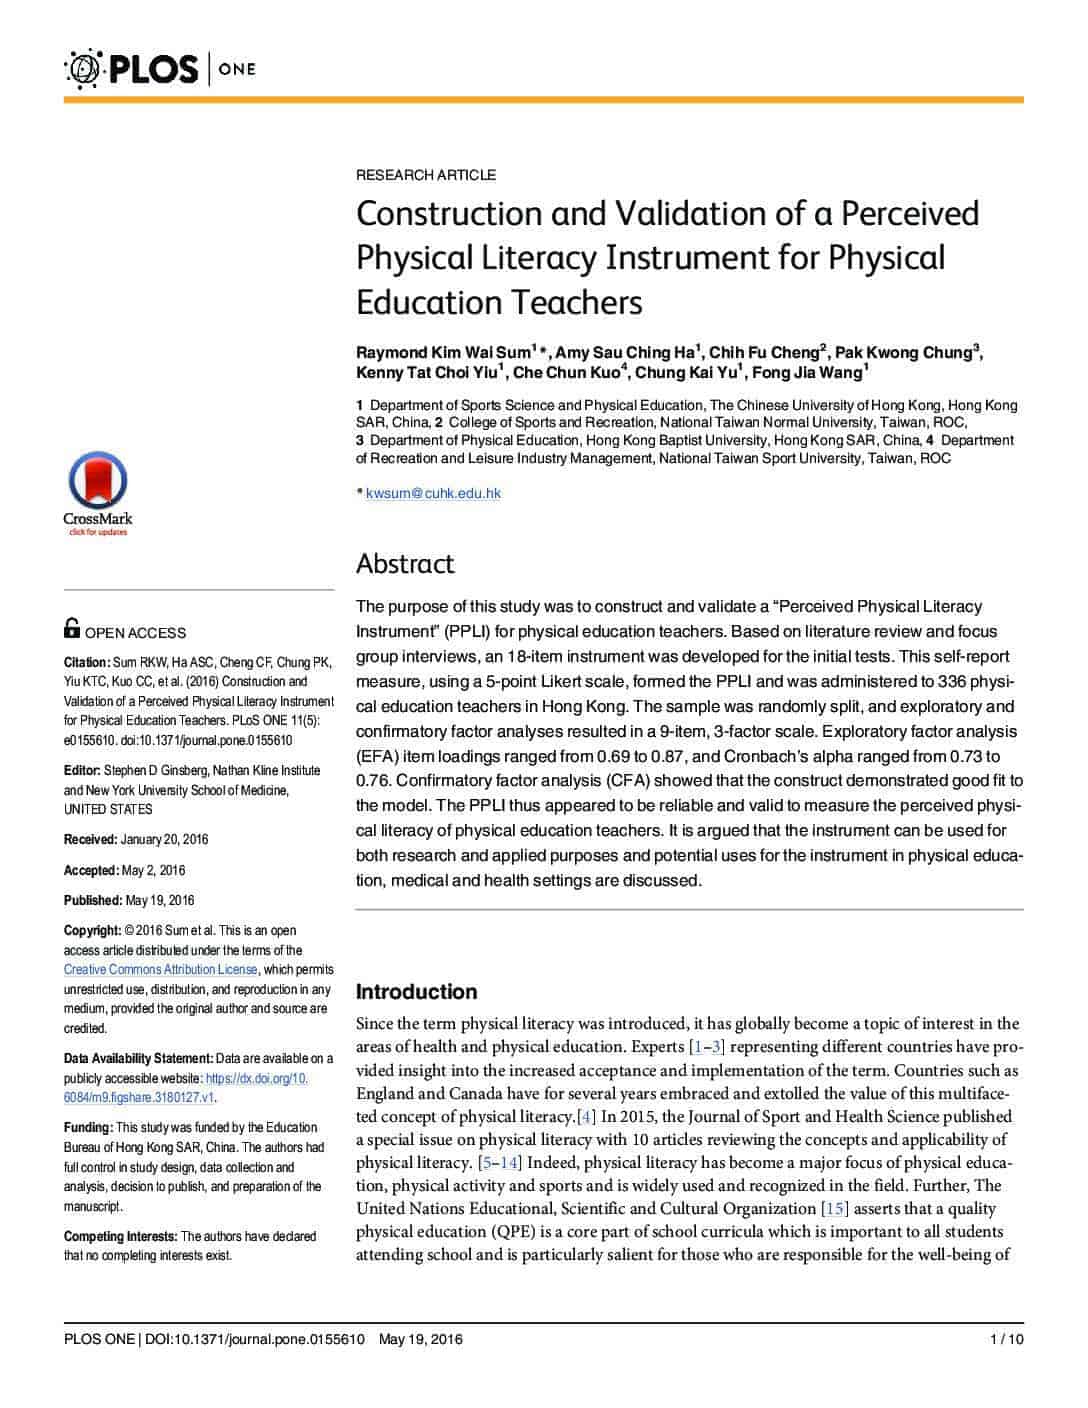 Construction and Validation of a Perceived Physical Literacy Instrument for Physical Education Teachers